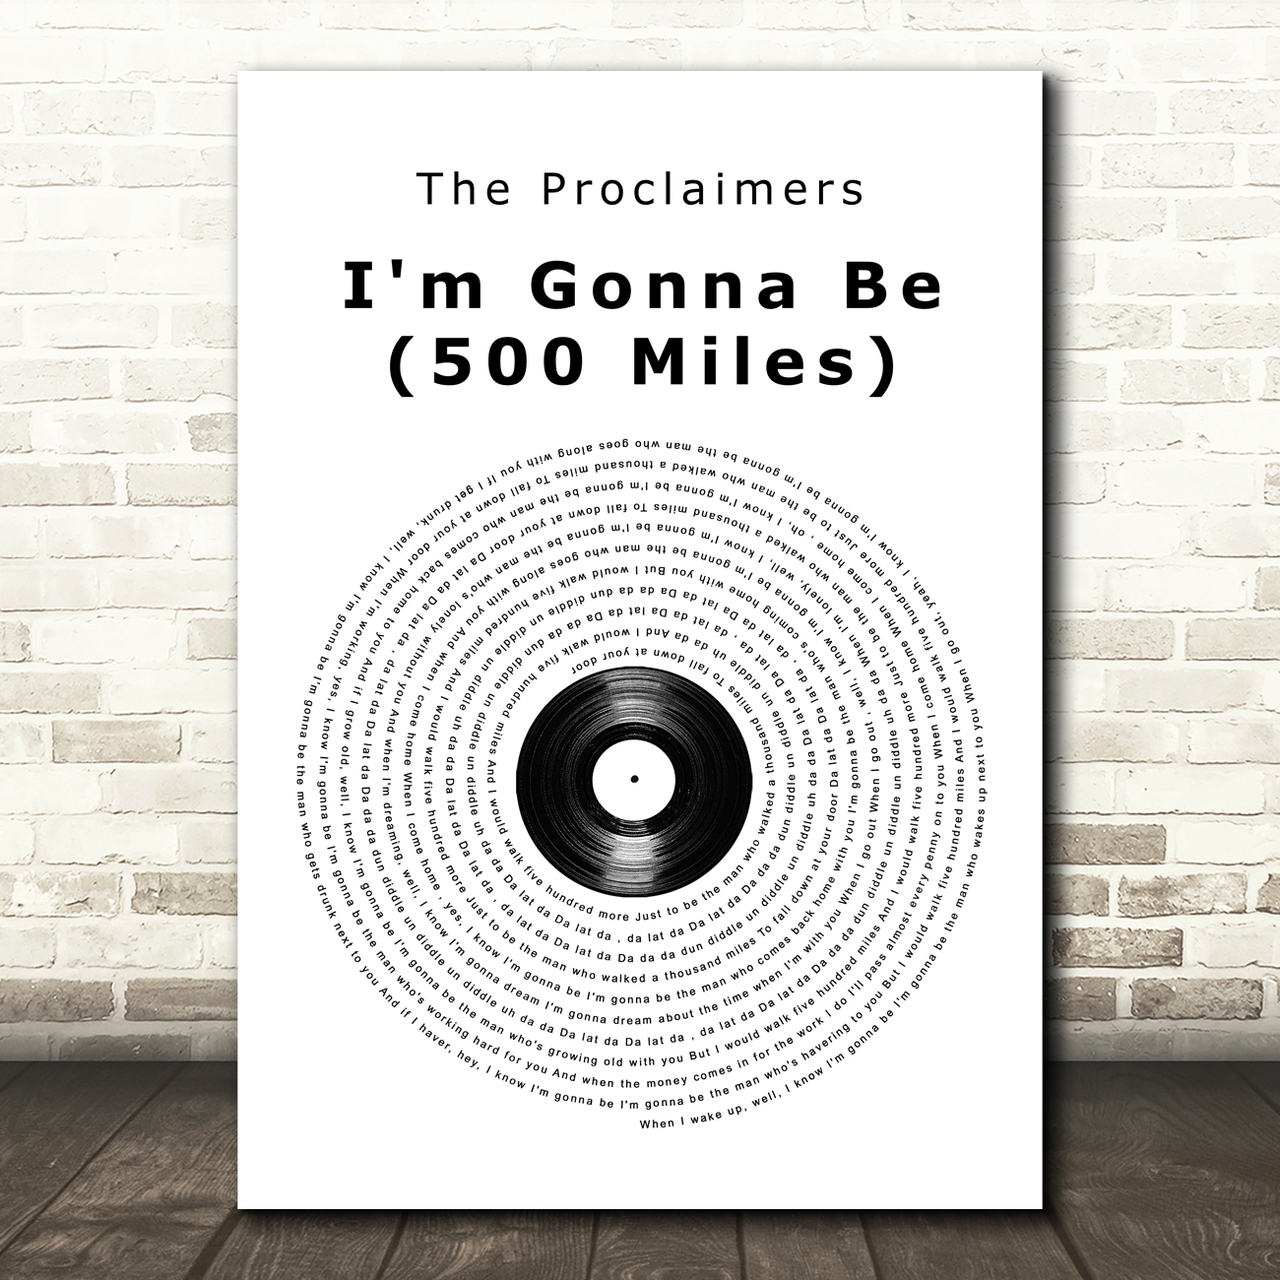 The Proclaimers I'm Gonna Be (500 Miles) Vinyl Record Song Lyric Quote Music Poster Print